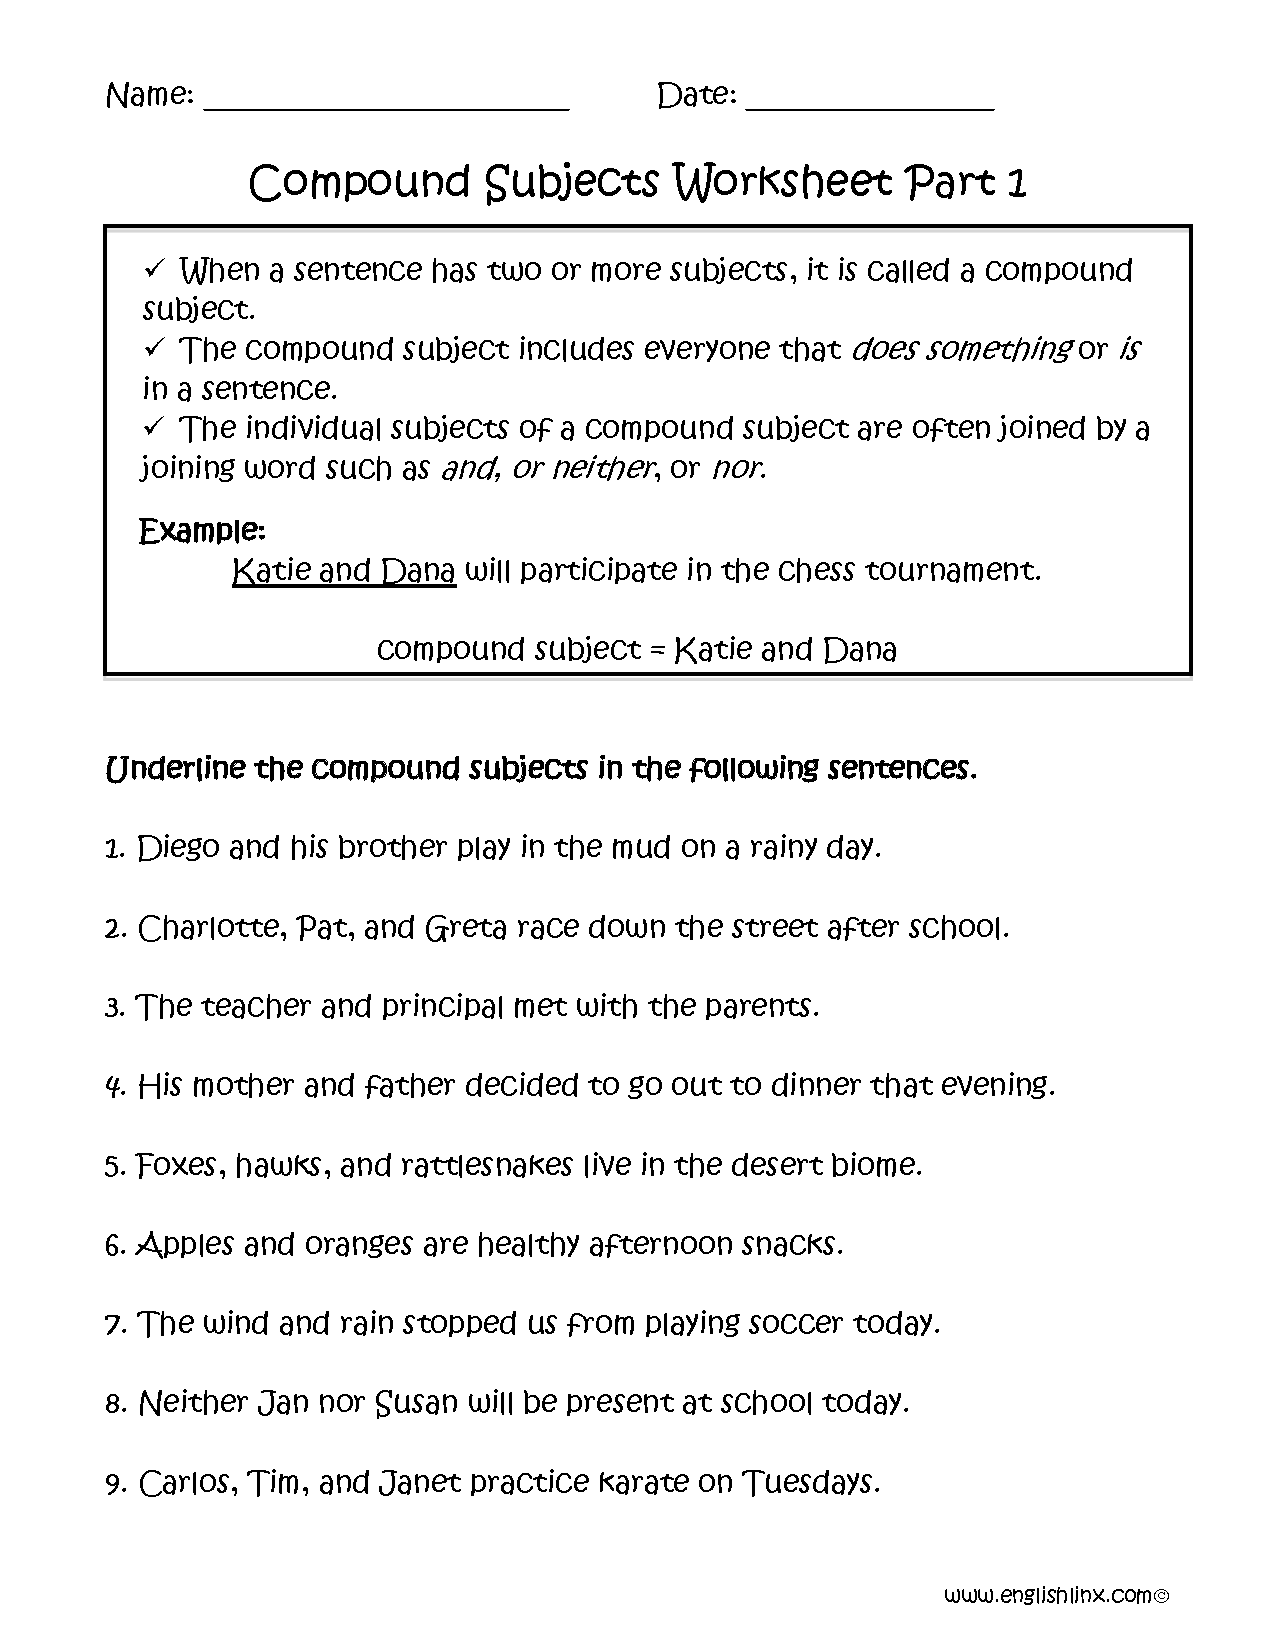 Compound Subject Worksheet Part 1